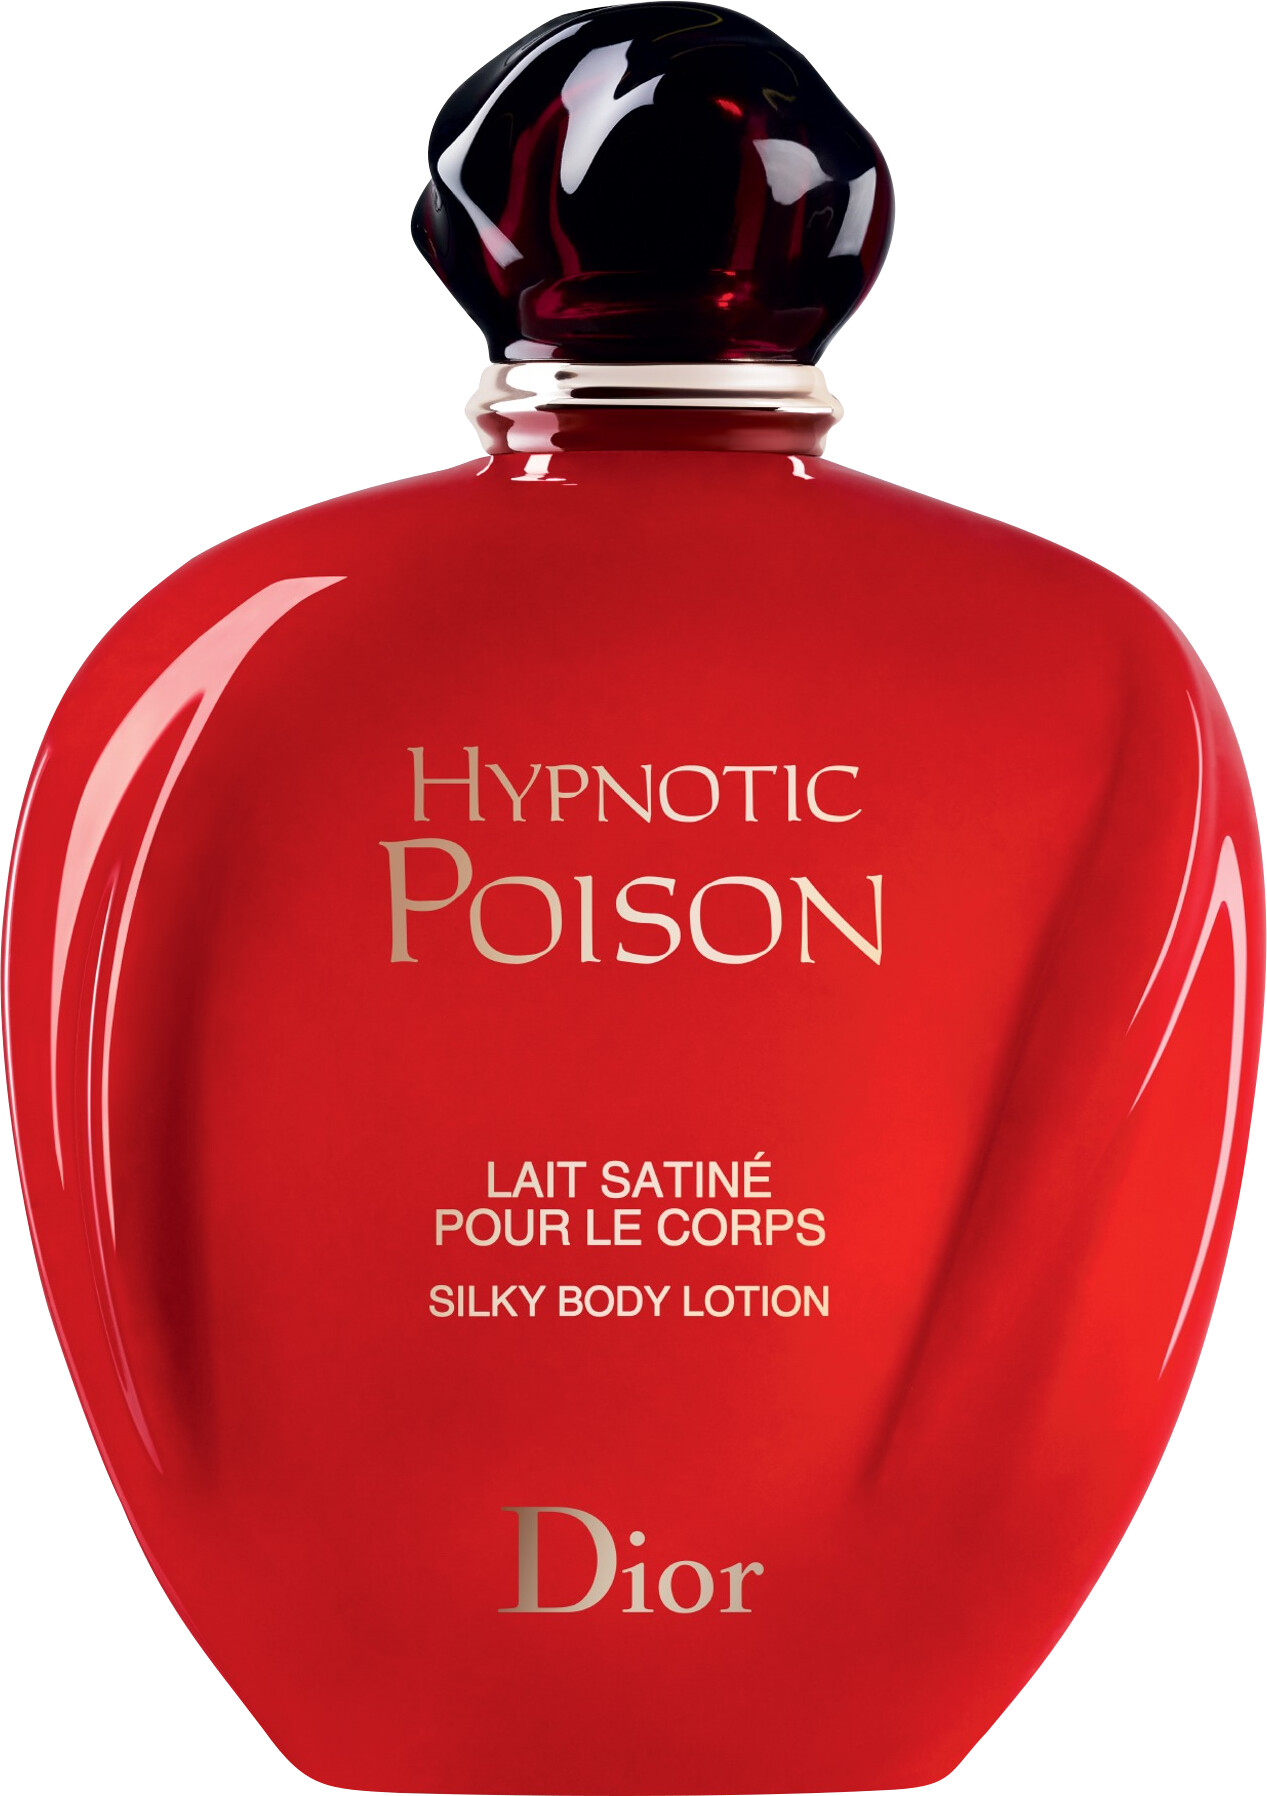 hypnotic poison lotion and shower gel